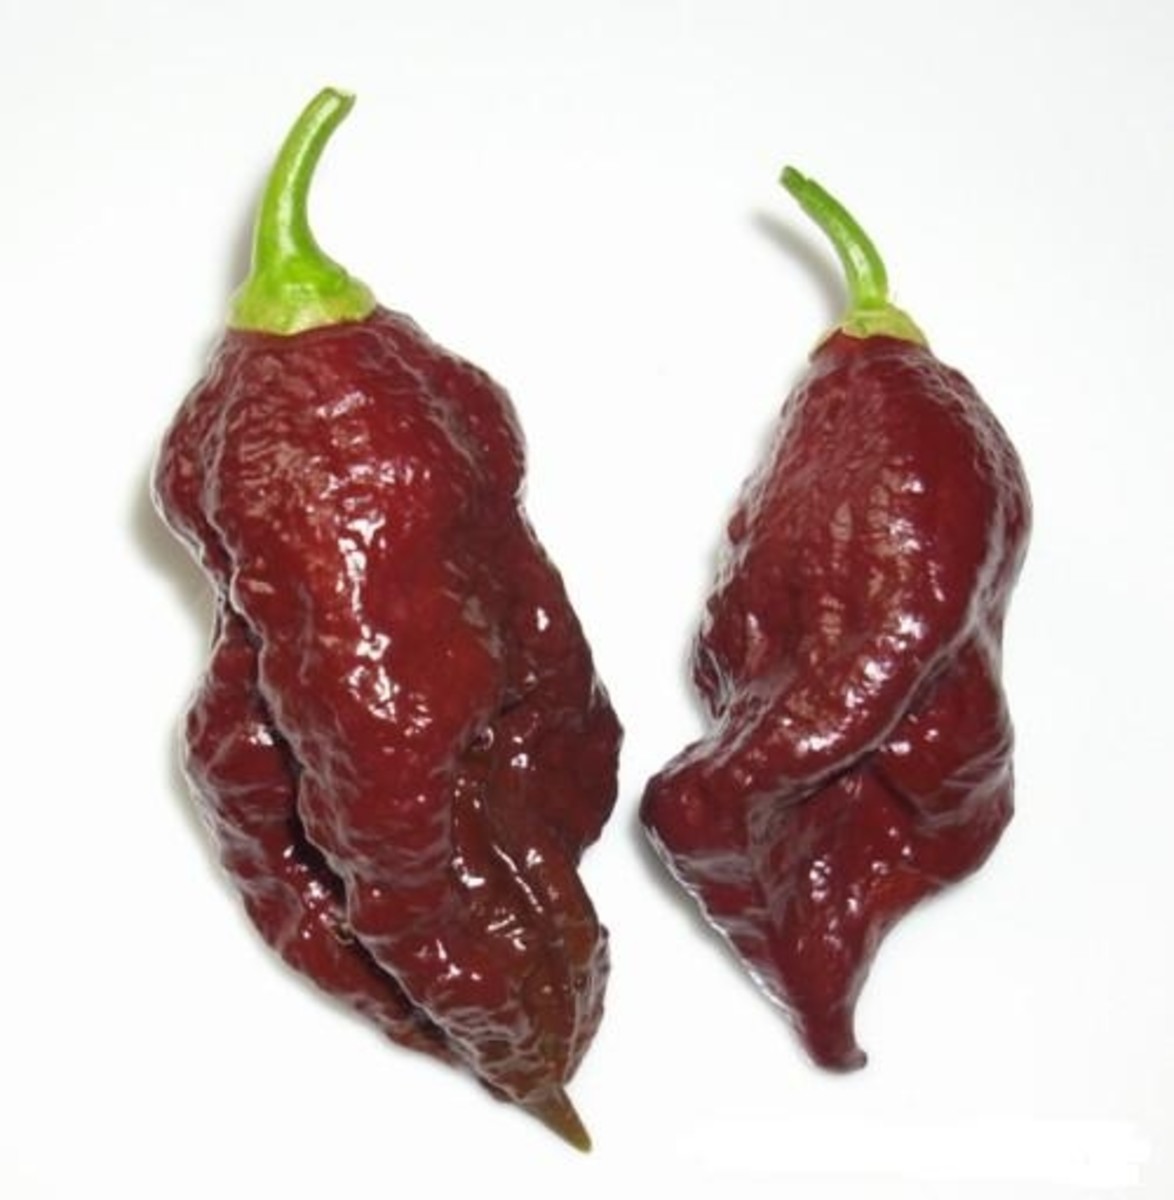 the-hottest-pepper-in-the-world-2